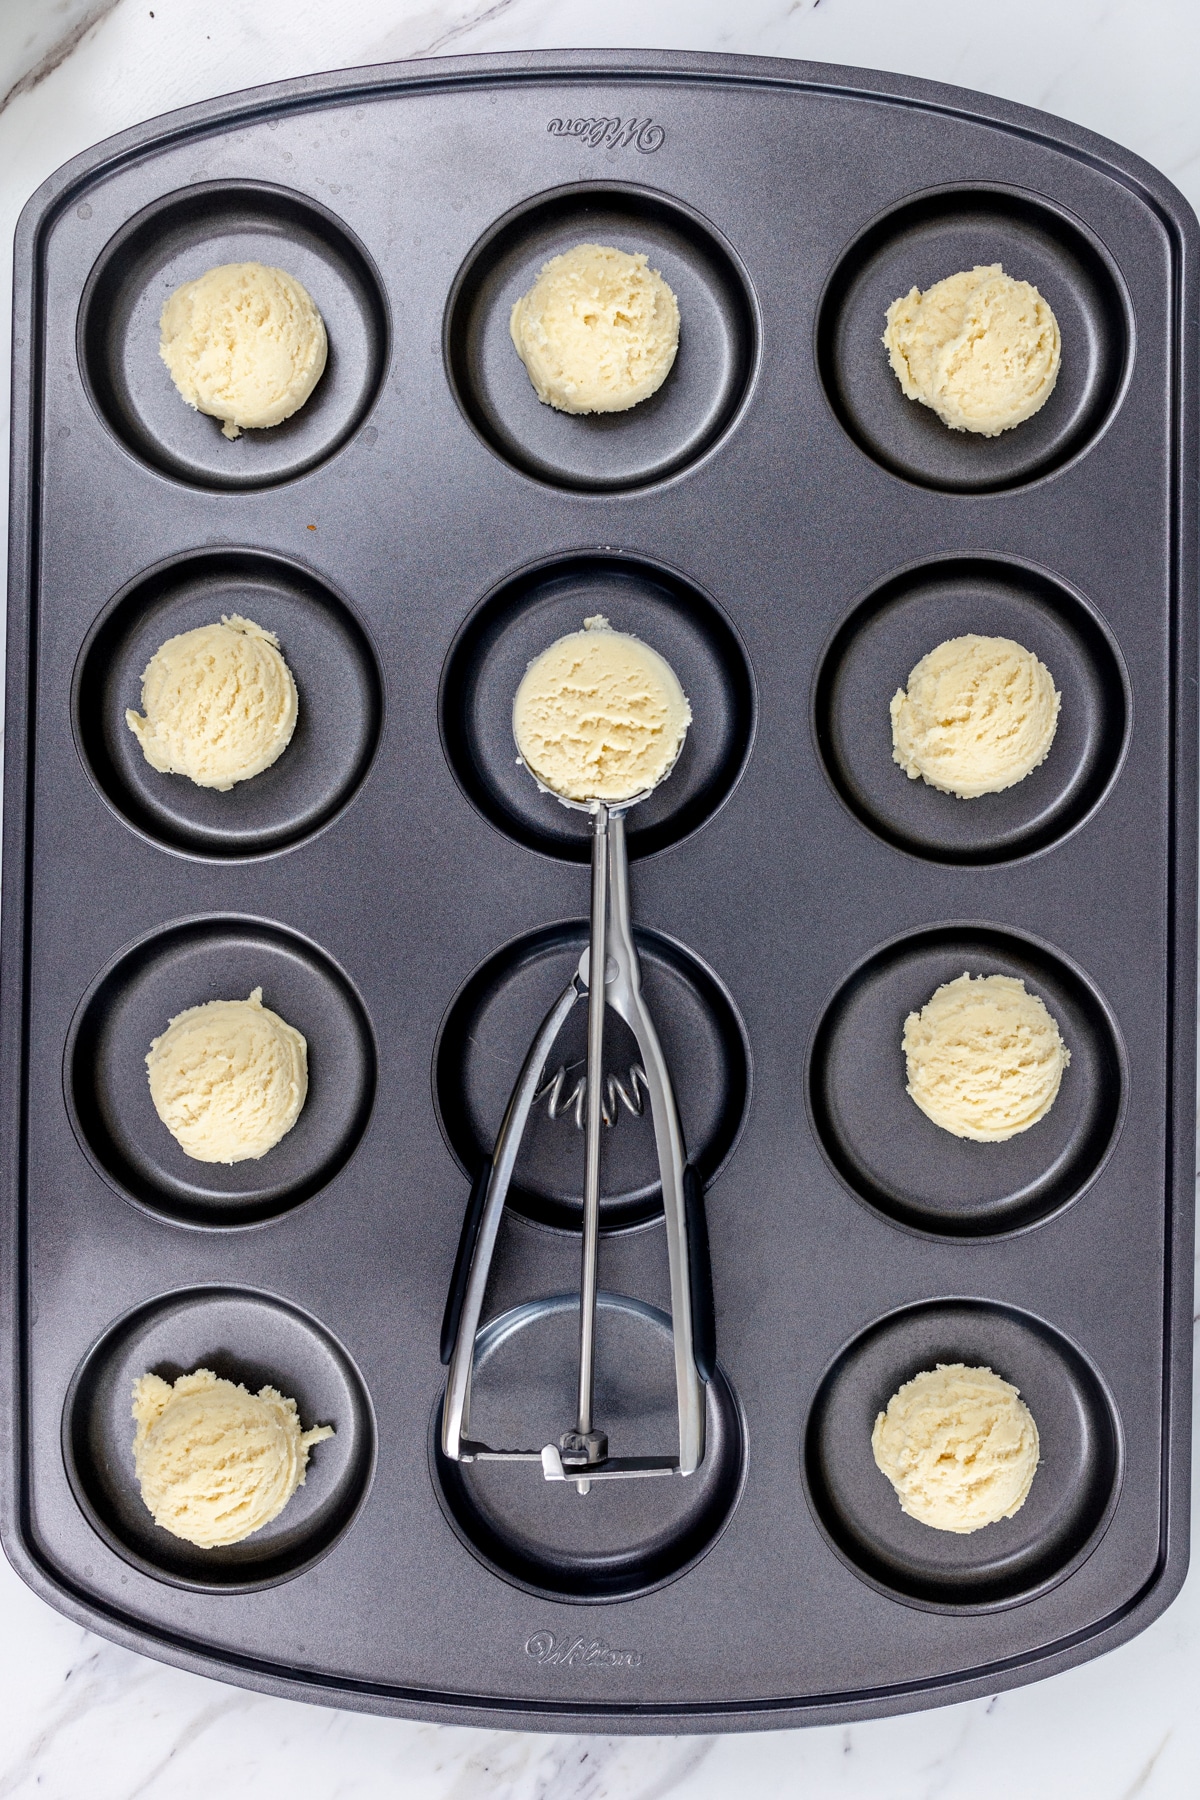 Top view of cookie dough scoops being added to a muffin top baking tray with a cookie scoop.